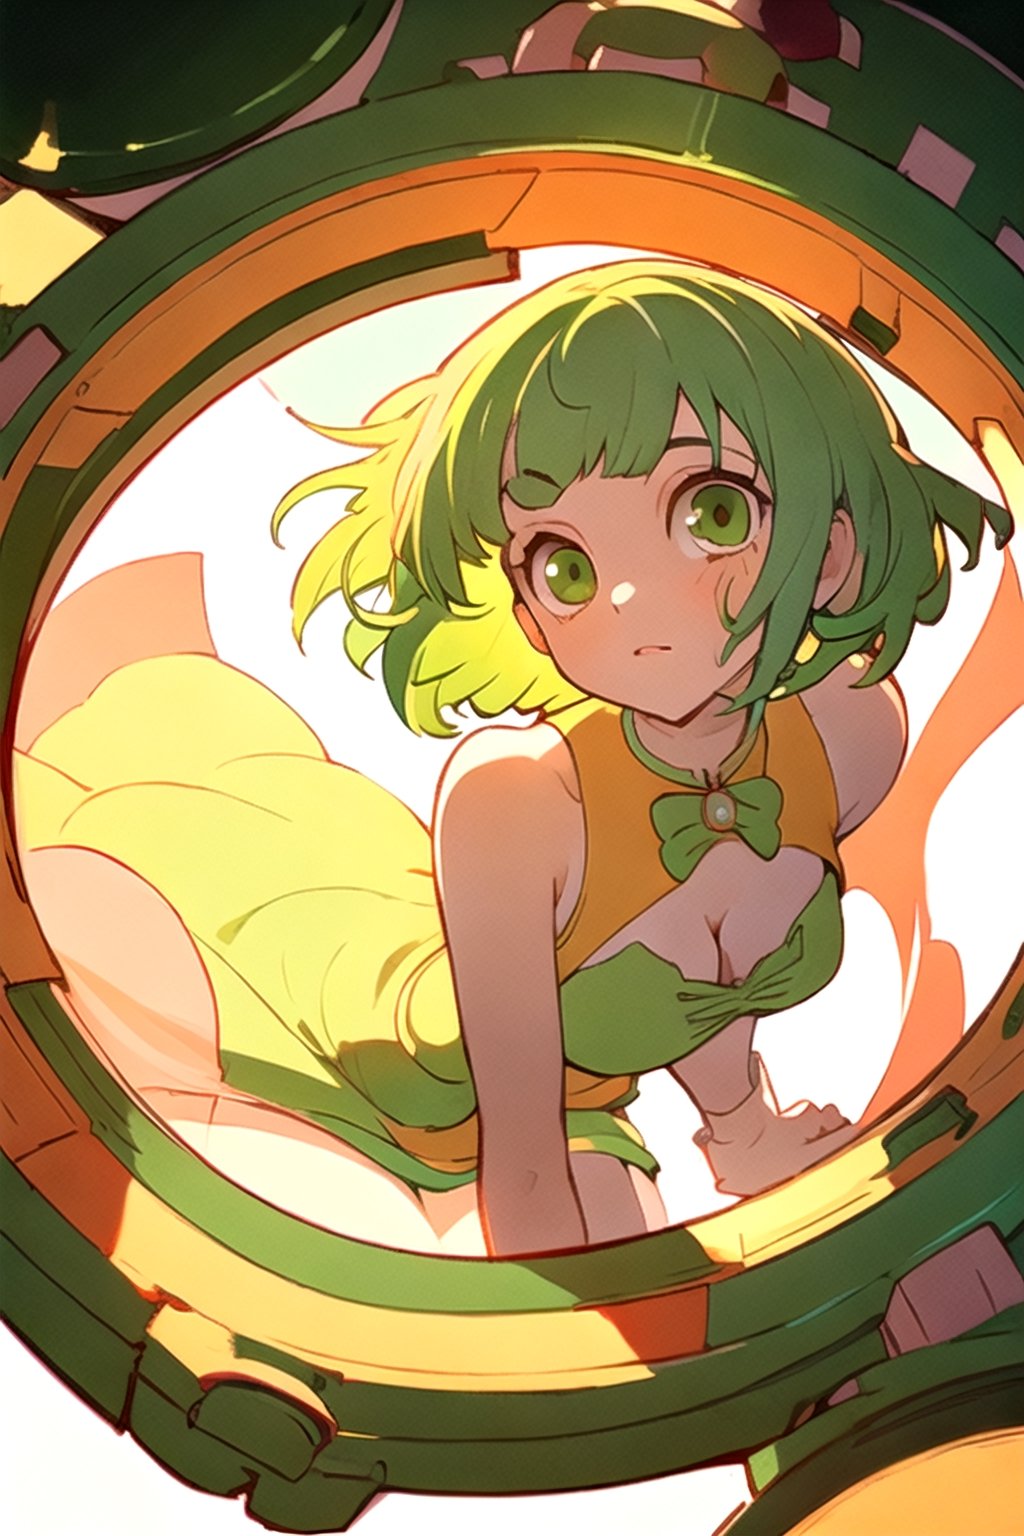 (best quality, masterpiece), soft lighting, dynamic upper angle, 1girl, Megpoid Gumi, beautiful short hair with two large bangs, beautiful detailed eyes, simple design, rounded boobs, upper view, green hair, green eyes, original detailed dress, cool pose, deep shadows in the eyes, cute face proportions,GUMI